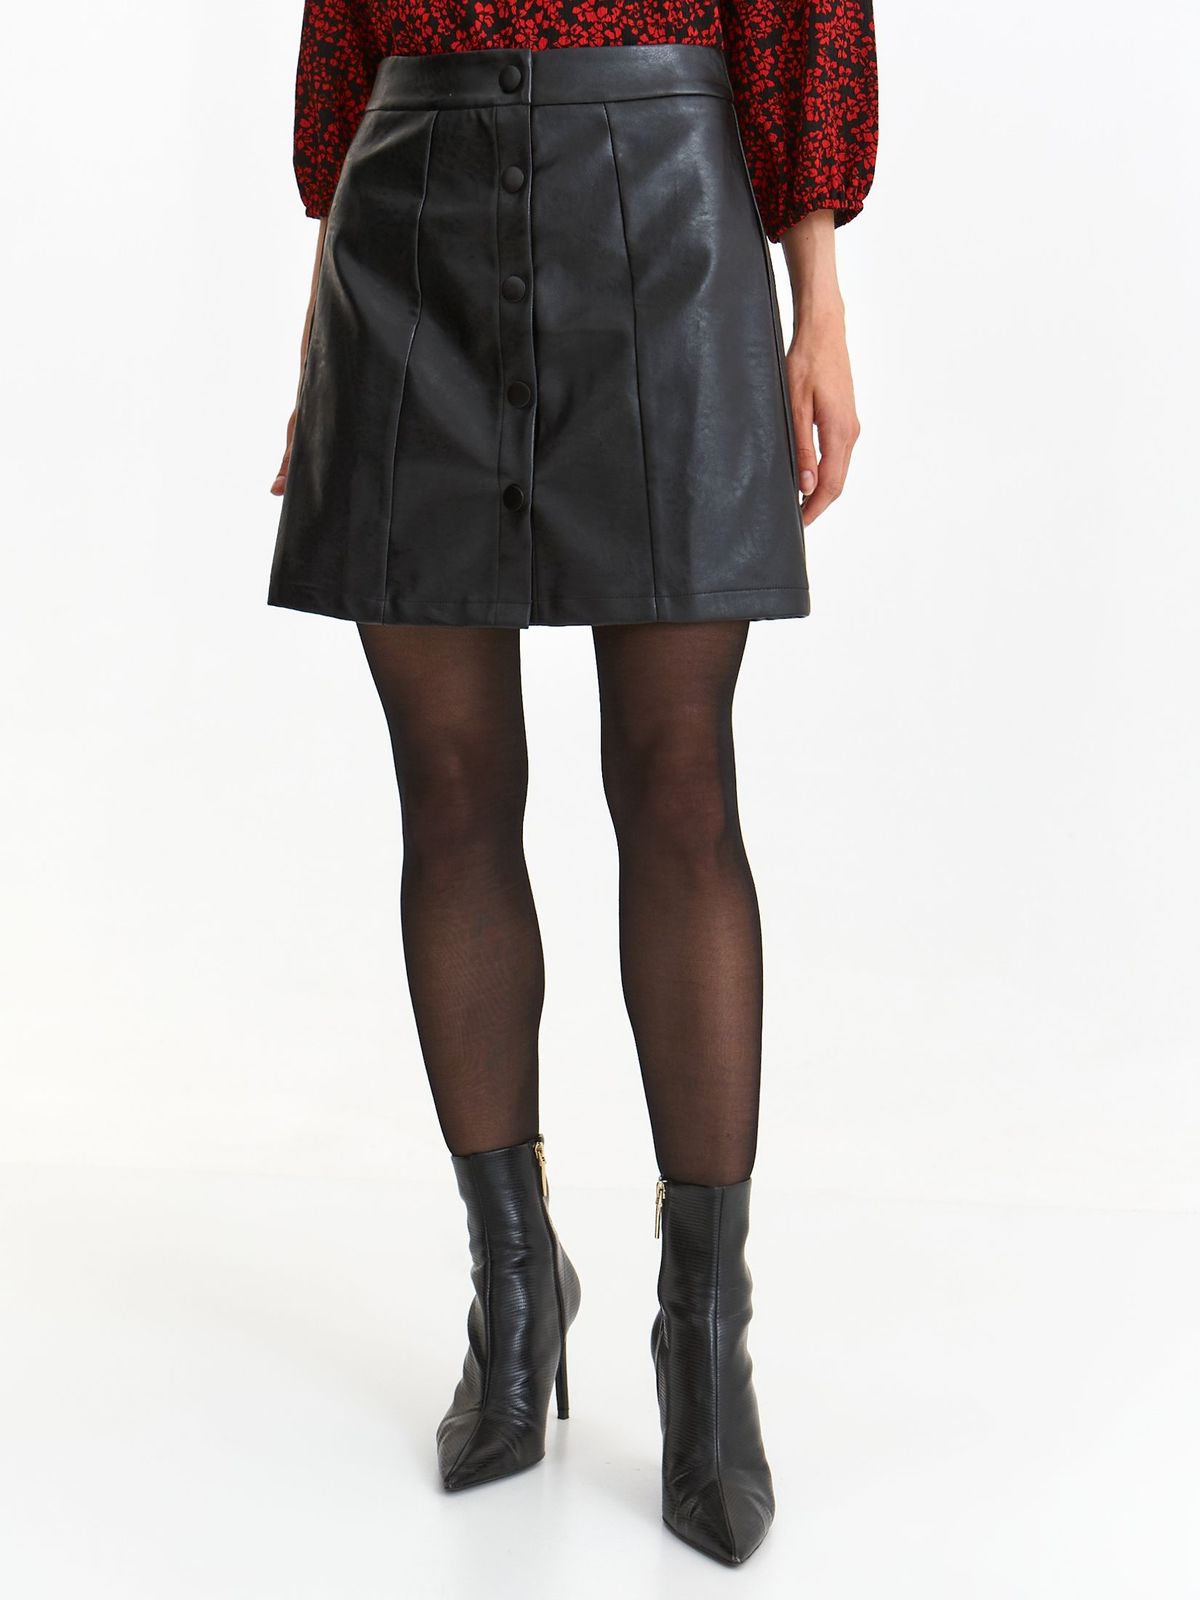 Black skirt from ecological leather short cut high waisted